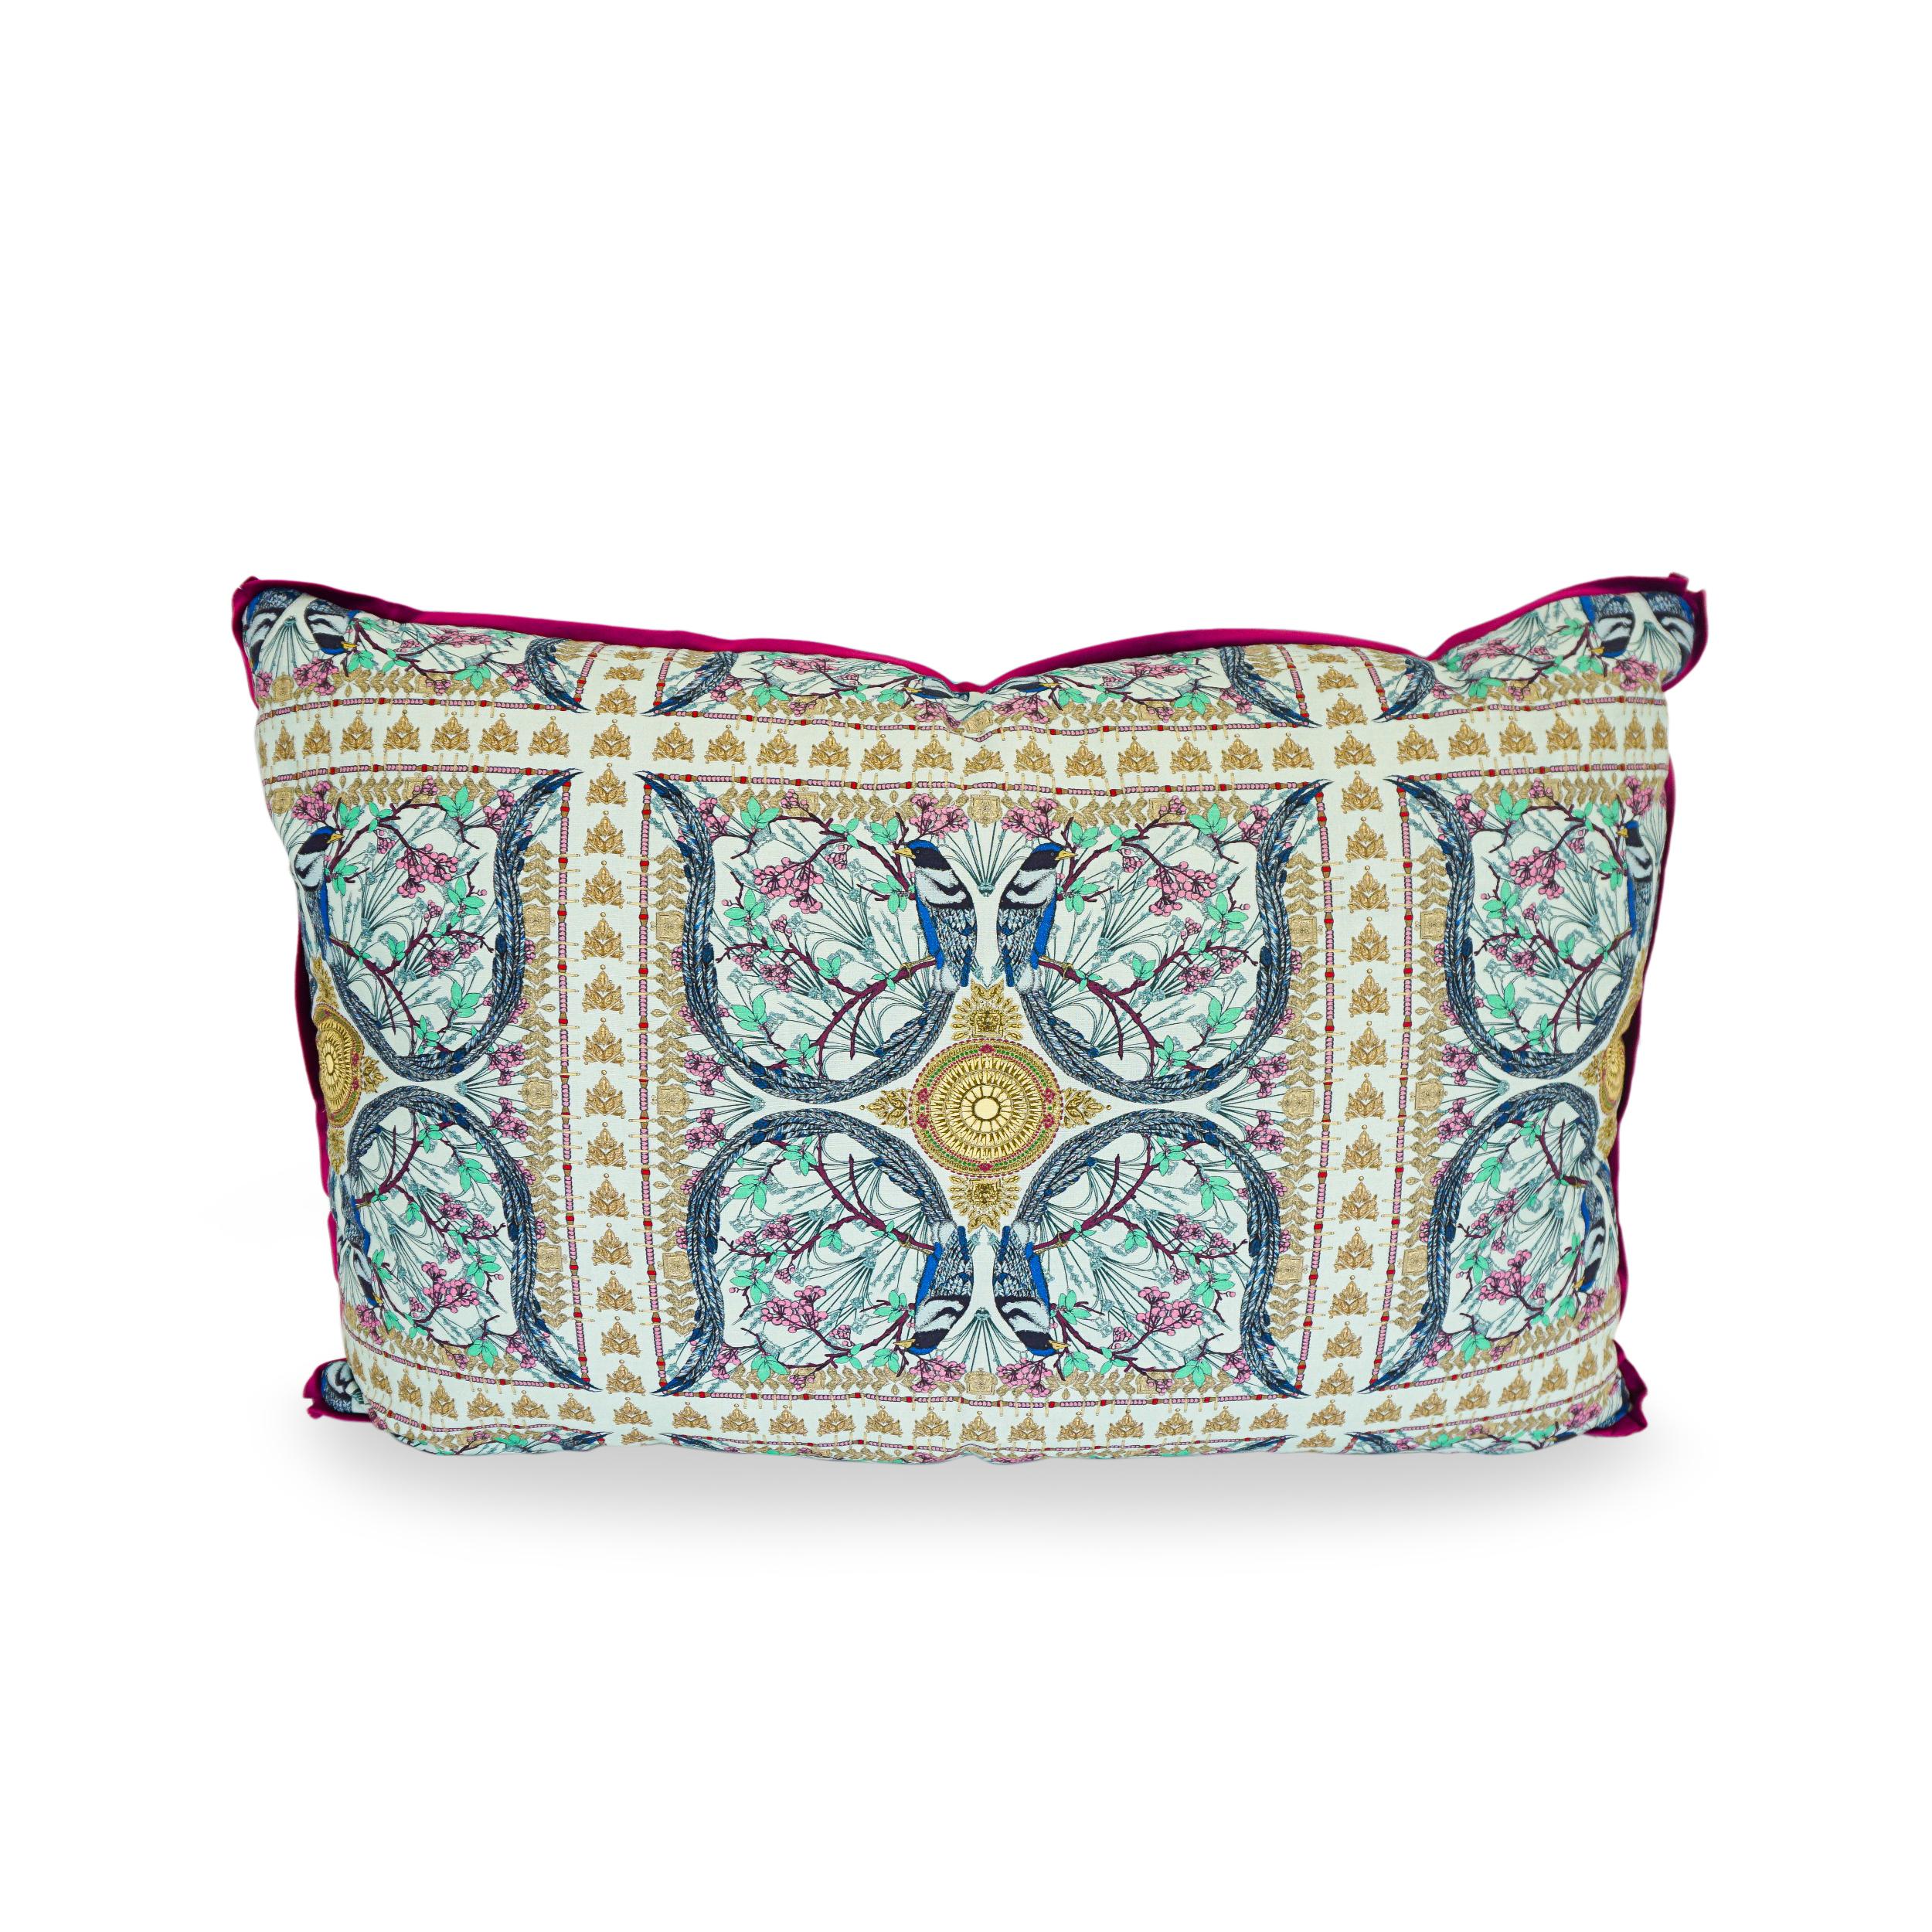 Elaborate printed linen with tile pattern on pillow face, aqua linen/cotton back and berry velvet flange. Oversized, understuffed throw pillow that's part duvet part pillow. Collapses flat but can be styled to sit inflated on a sofa. Down/feather